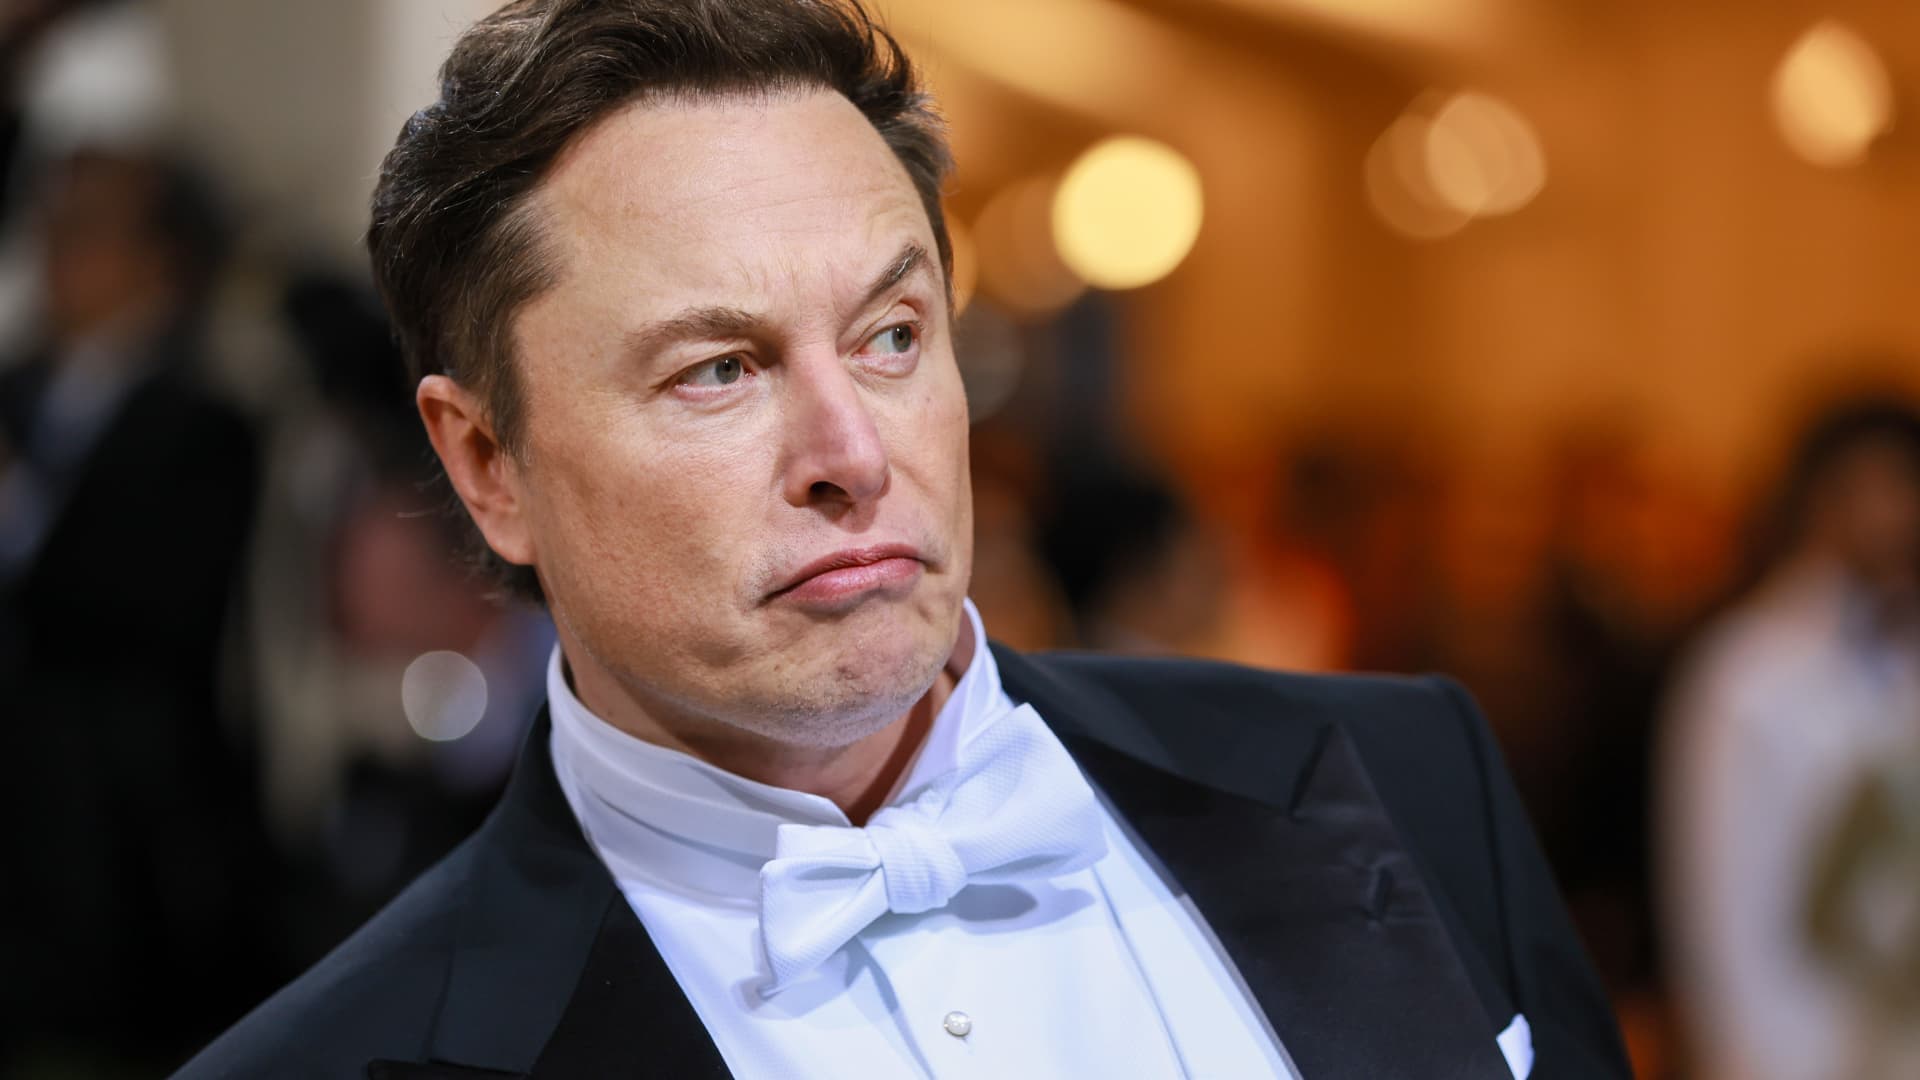 Elon Musk says it’s time for Trump to “sail into the sunset”